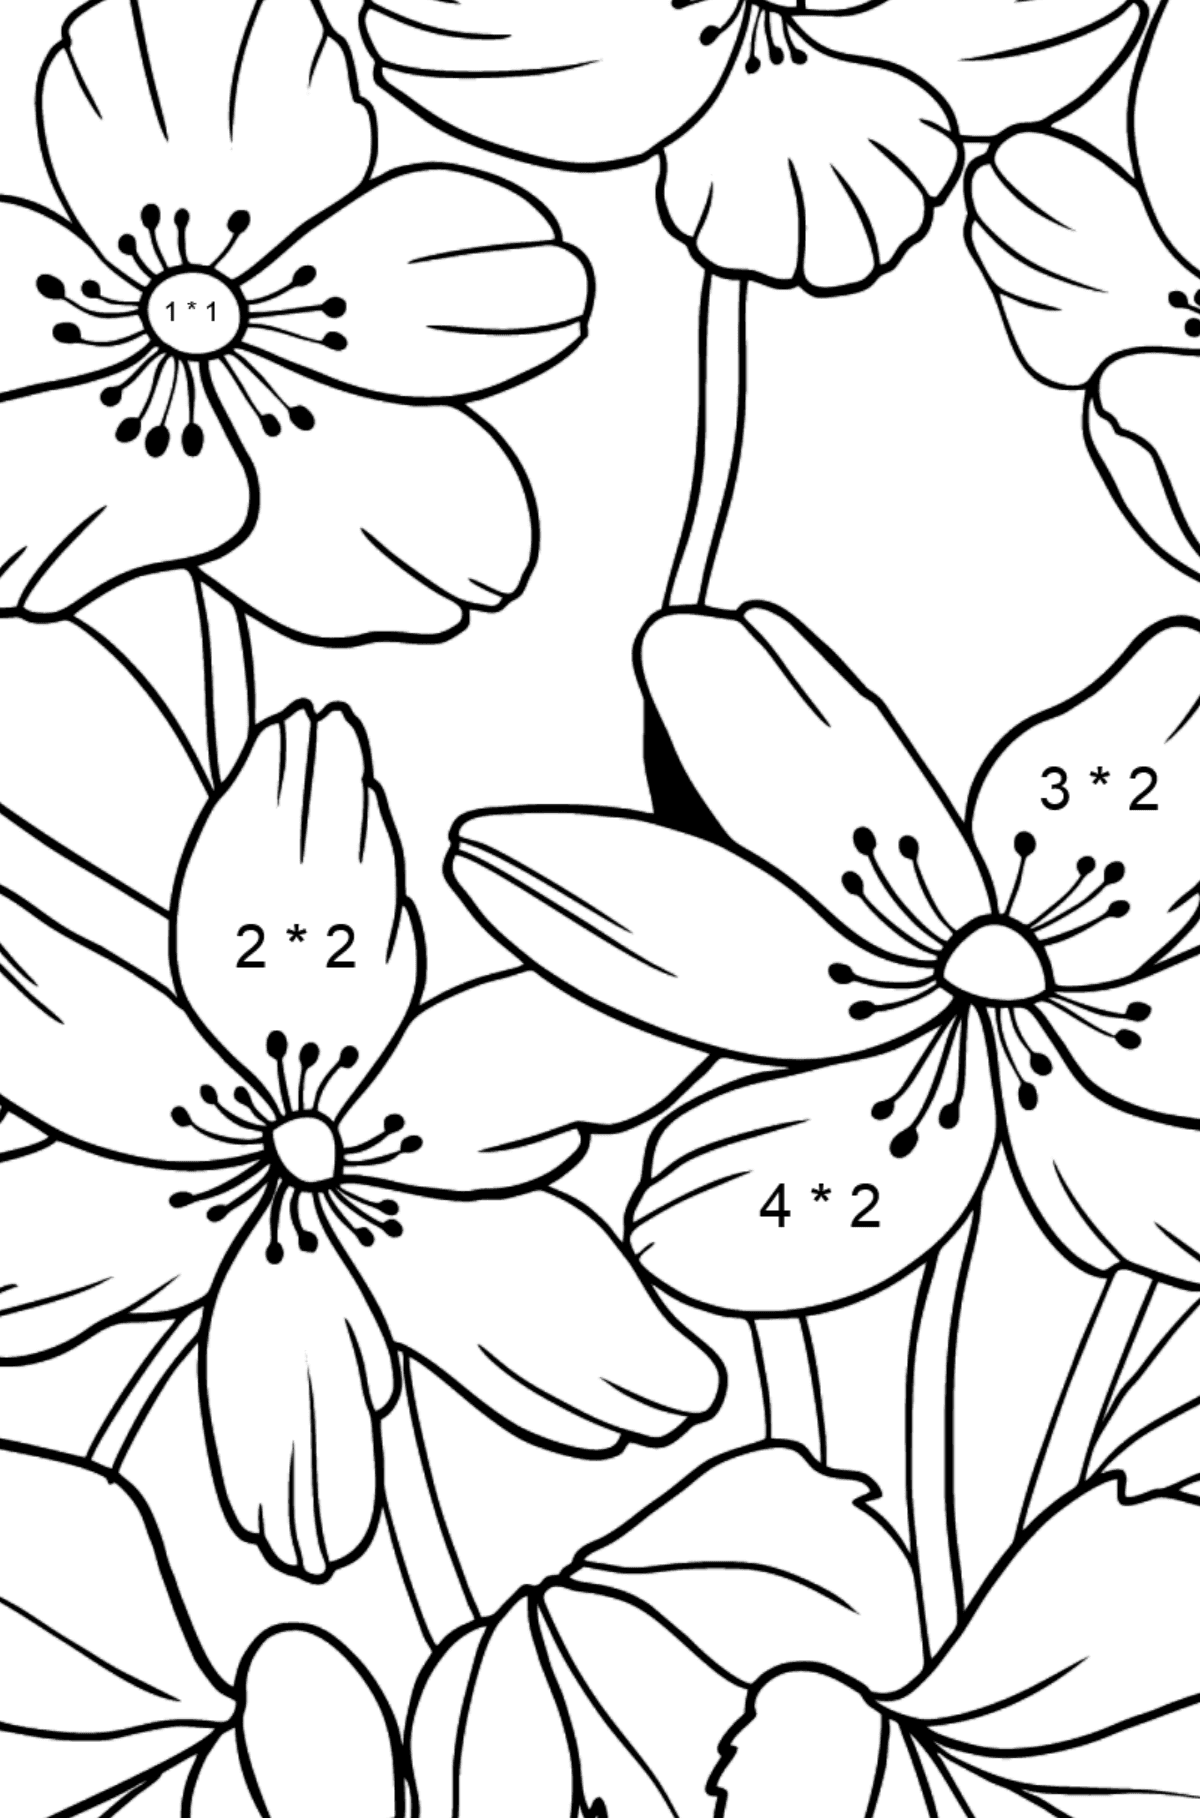 Flower Coloring Page - A Pastel Yellow Windflower - Math Coloring - Multiplication for Kids